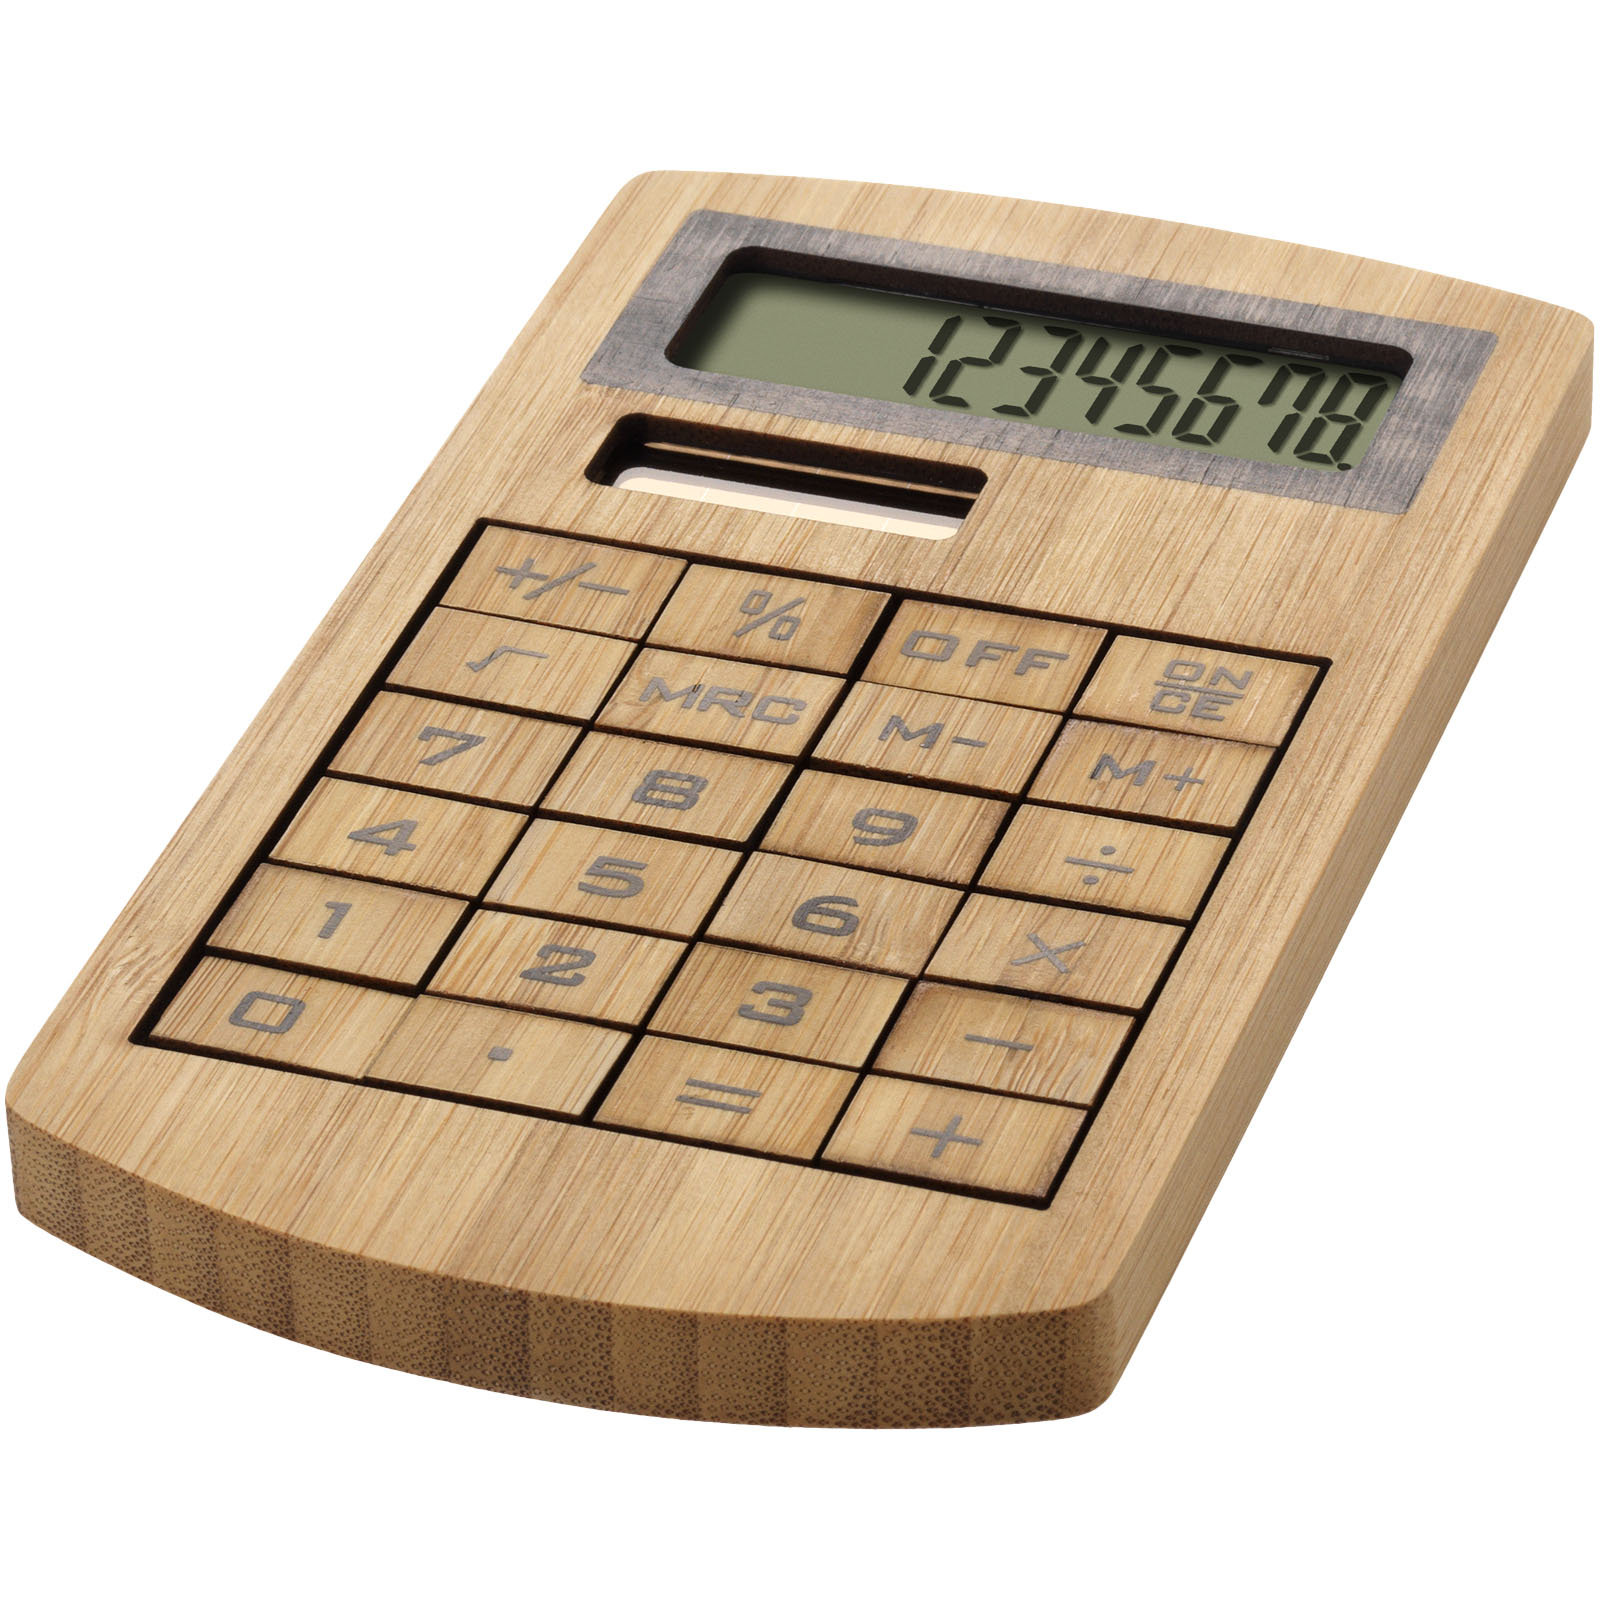 Eight digit eco-friendly bamboo calculator MANNIE - natural